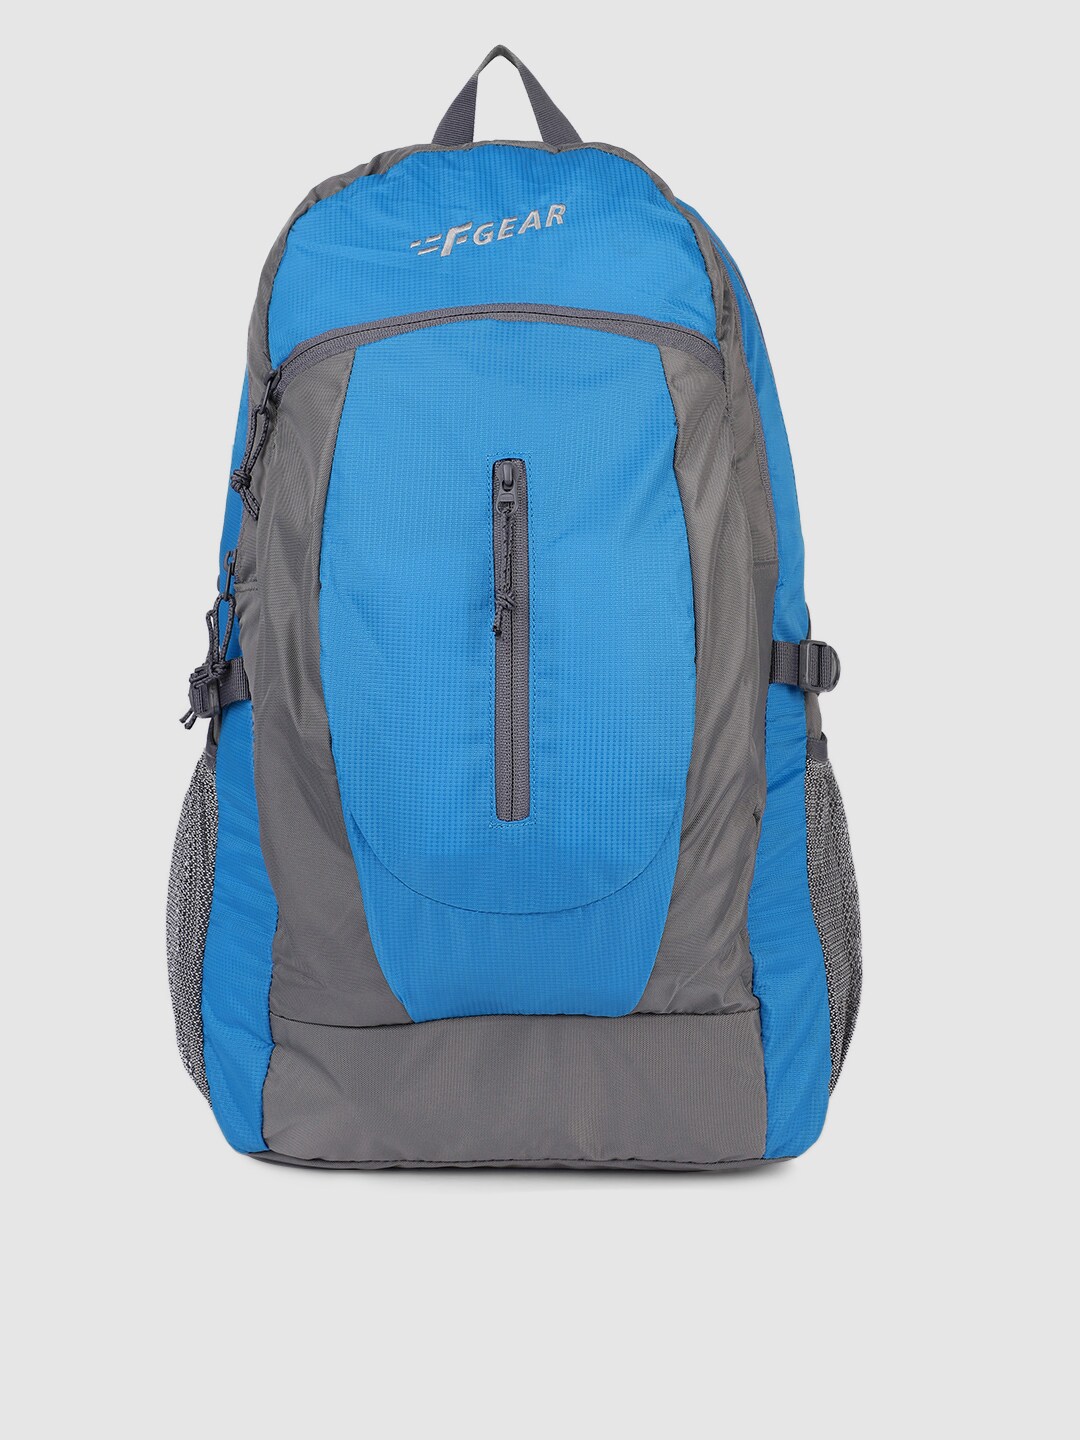 F Gear Unisex Blue & Grey Colourblocked Backpack Price in India